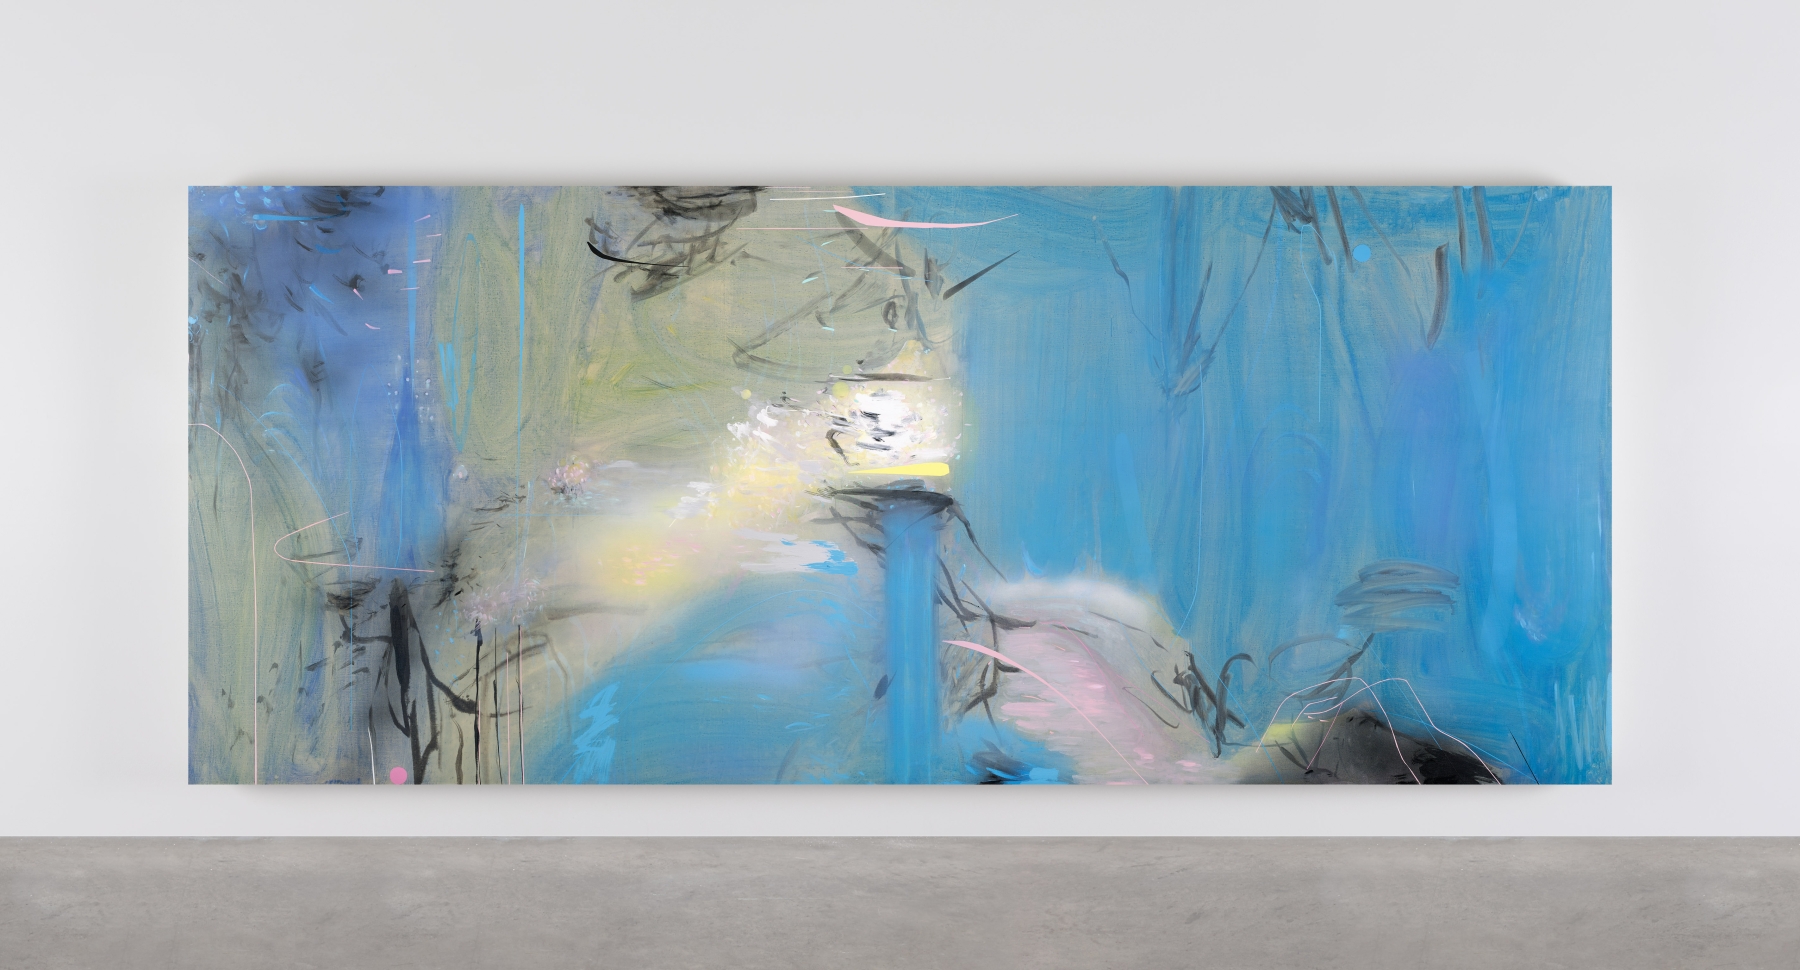 Zhou Li
Landscape of nowhere: Water and dreams No.1, 2022
mixed media on canvas
250 x 600 cm / 98.4 x 236.2 in &amp;nbsp;